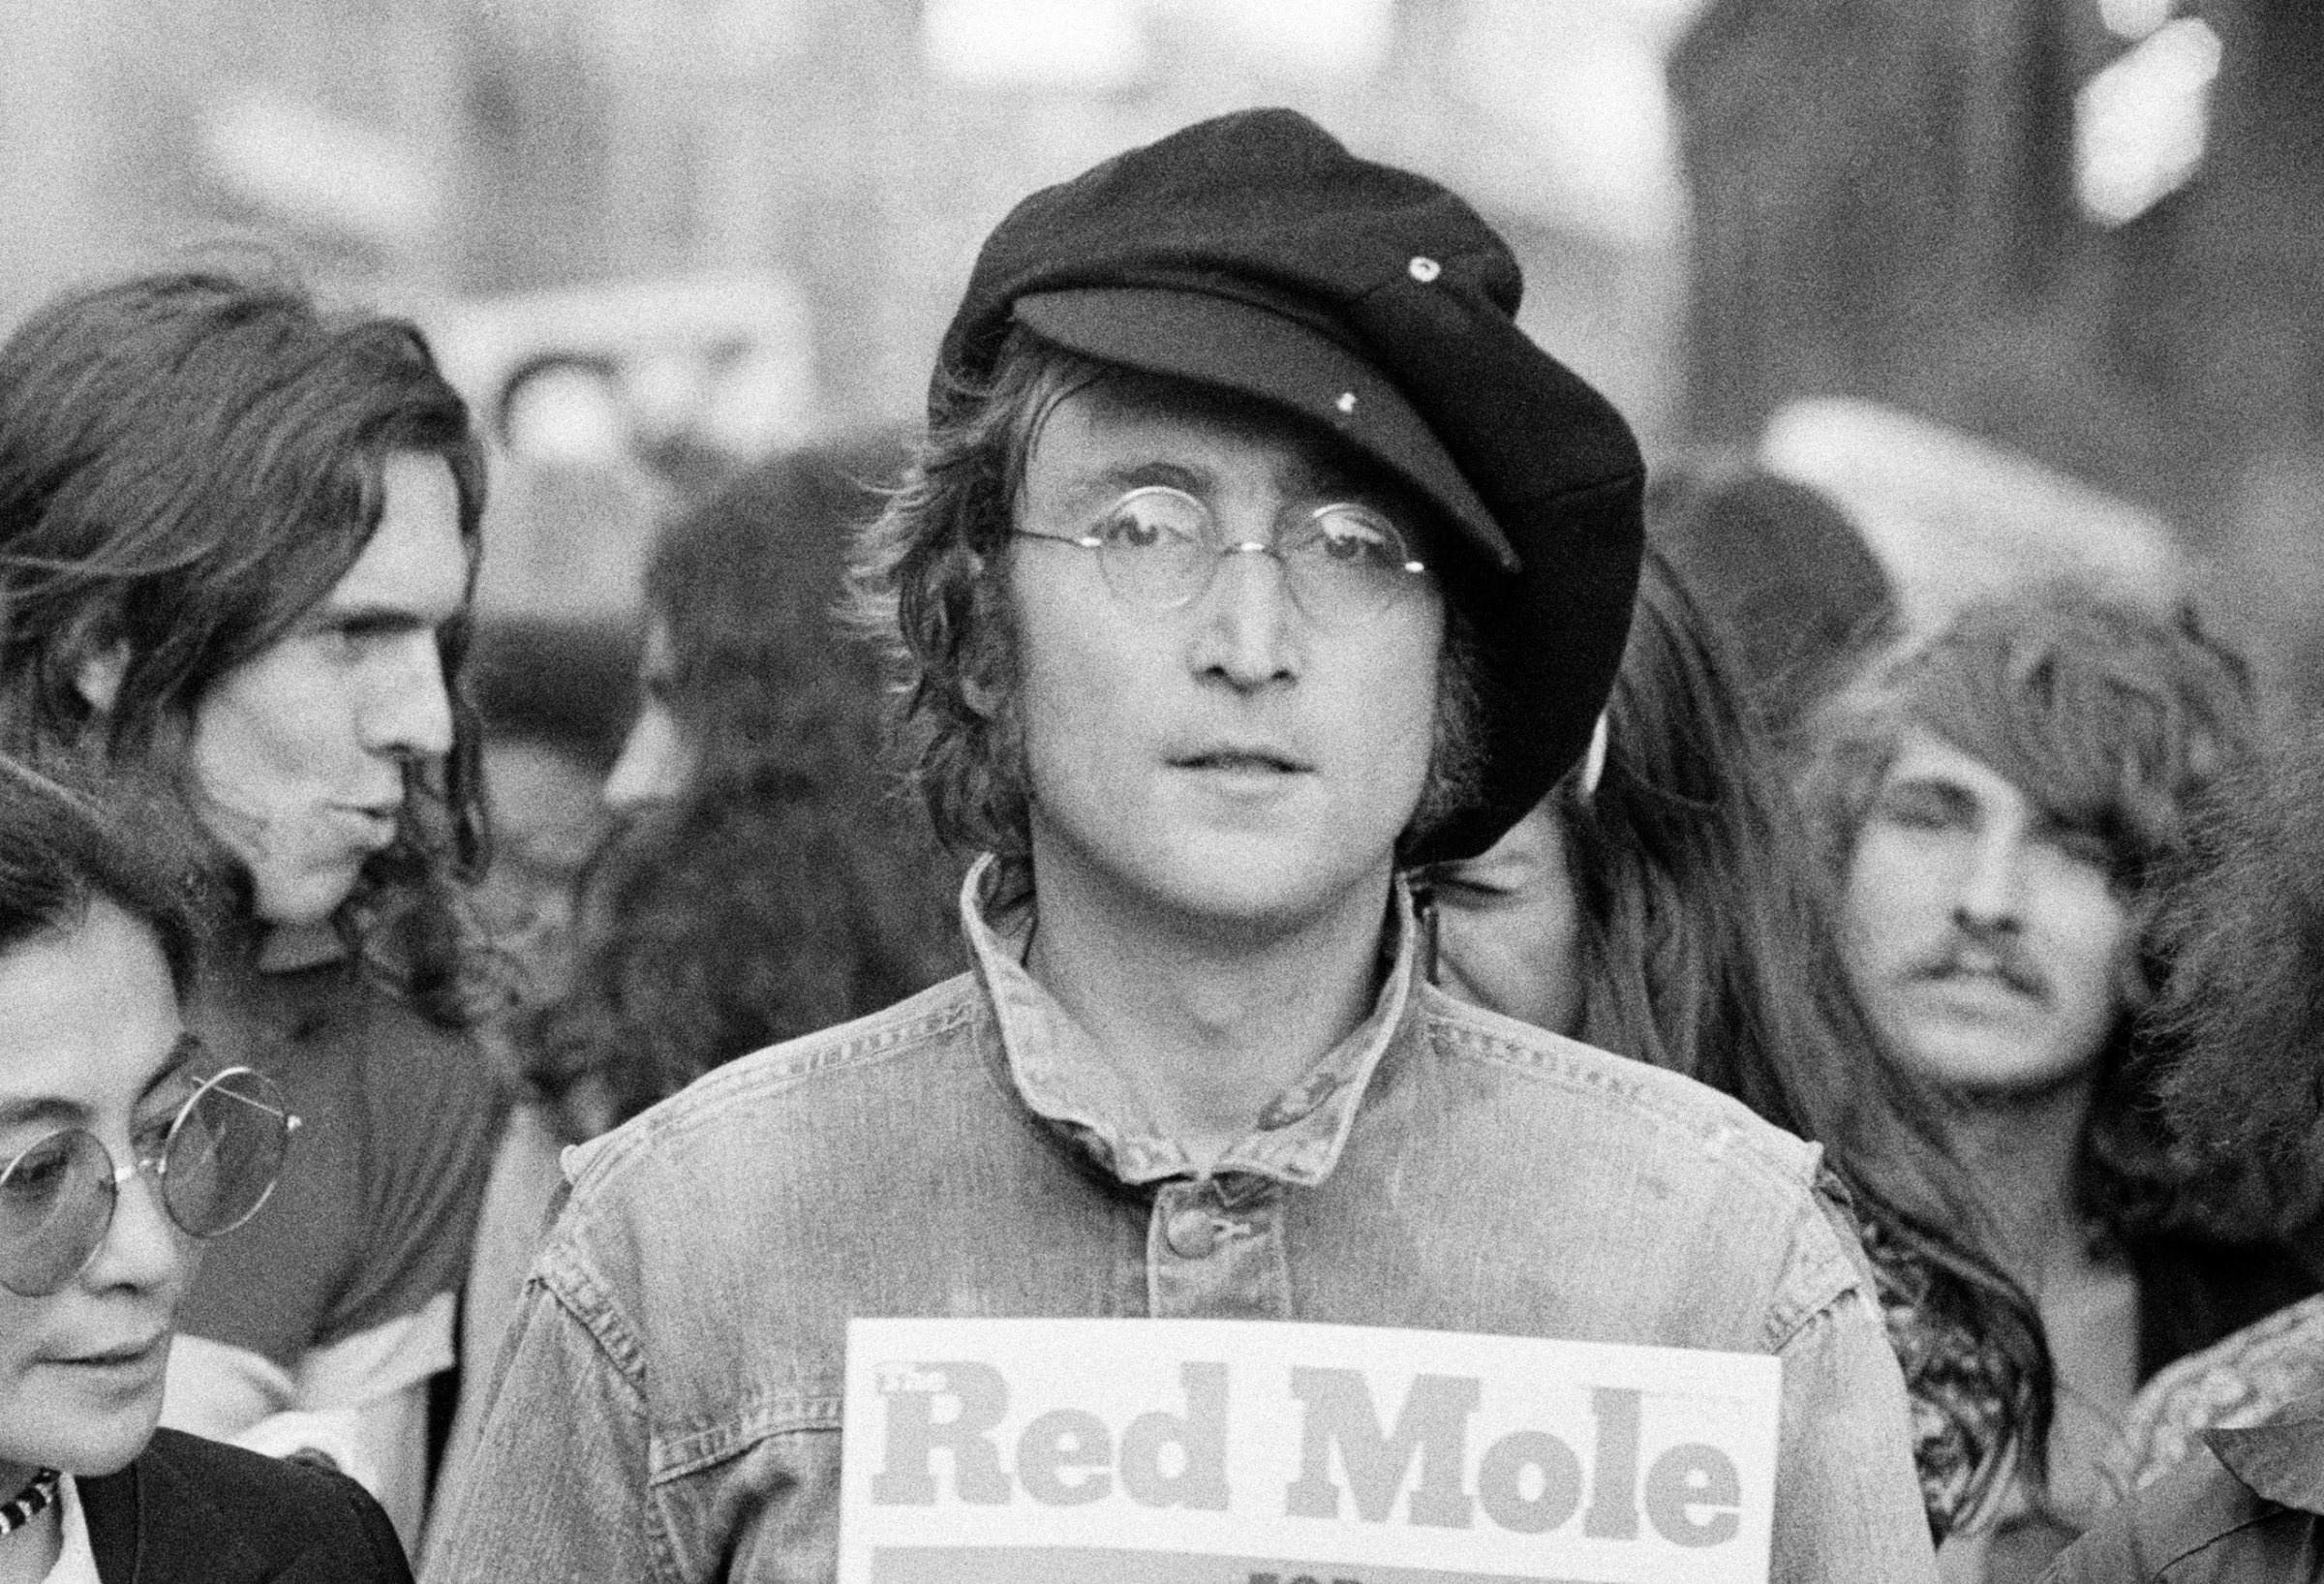 John Lennon and Yoko Ono (extreme left) as they attend a rally in Hyde Park, London, England, 1975.